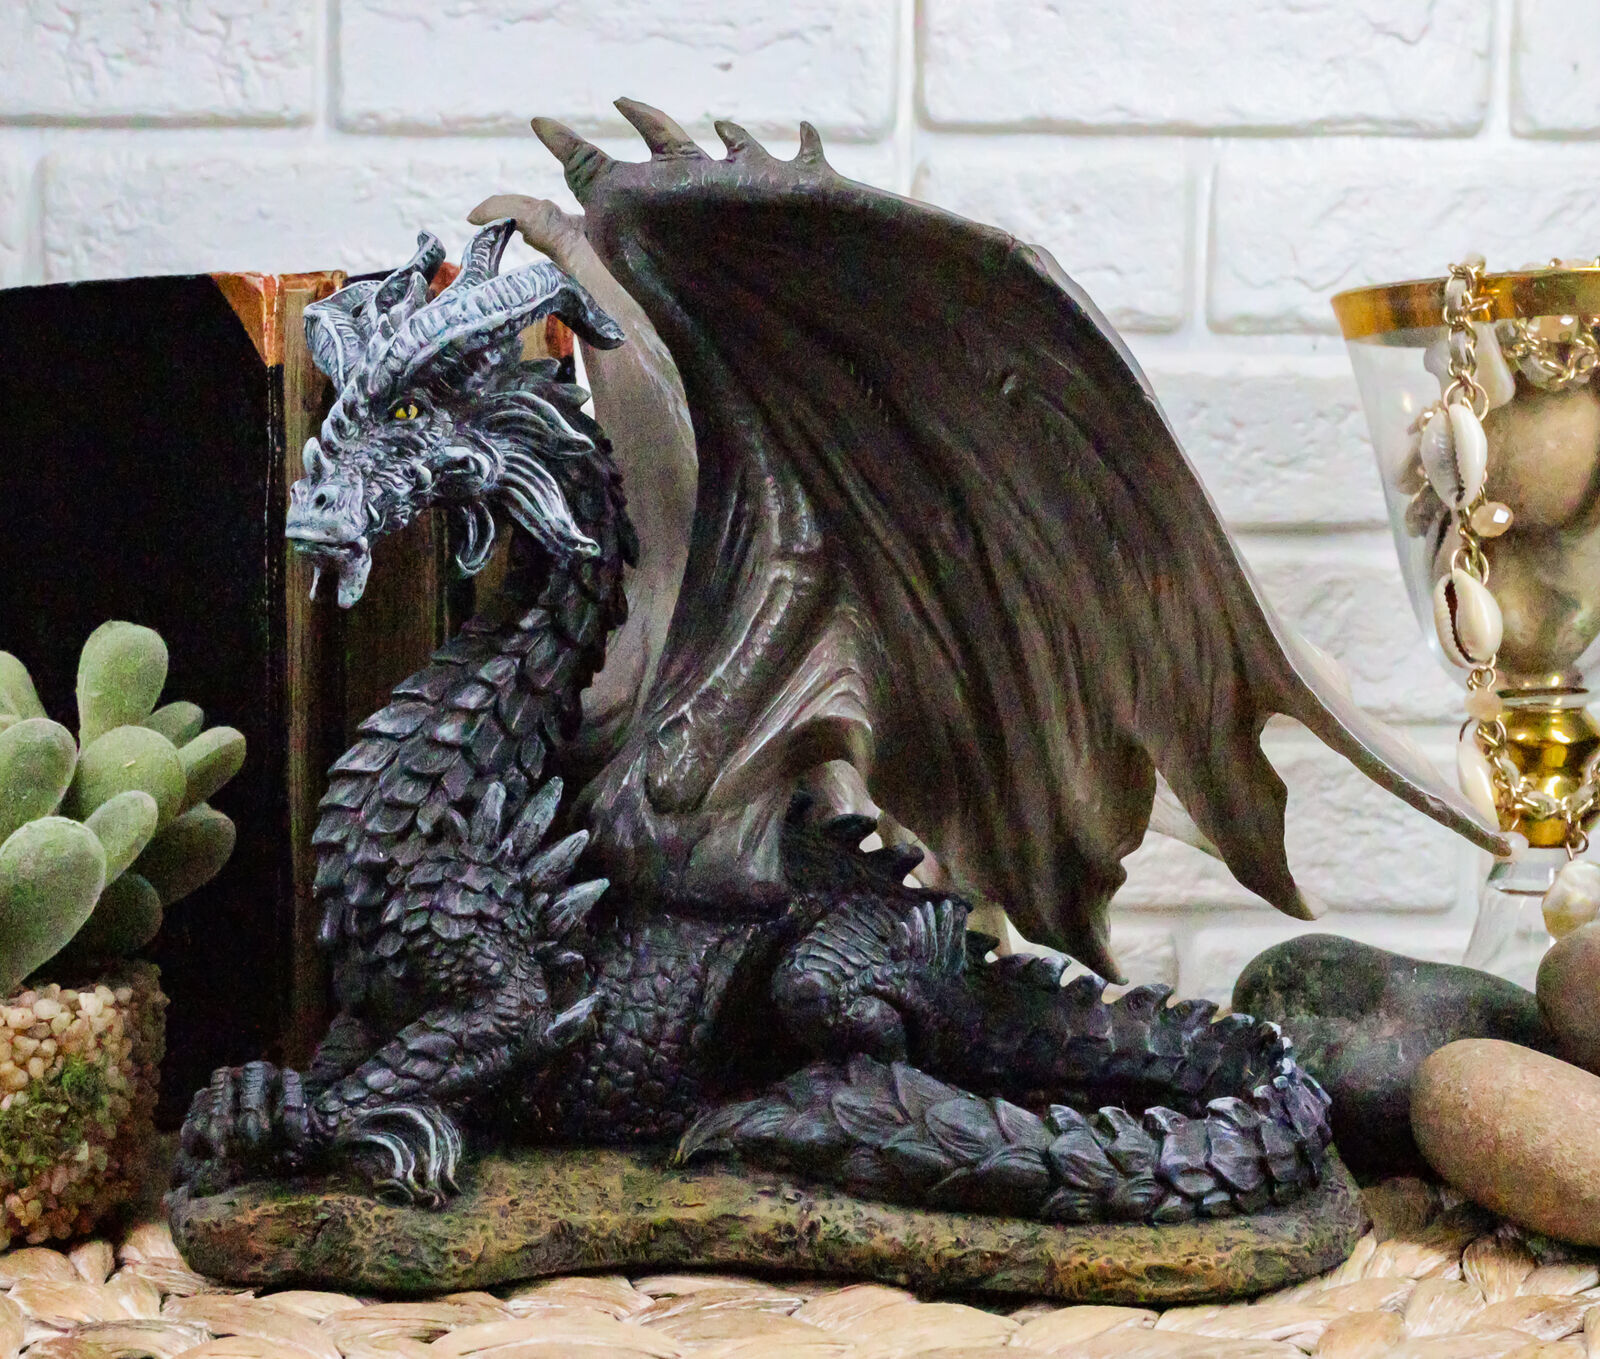 Primary image for Nightfury Legendary Horned Wise Old Black Medieval Dragon in Repose Statue 8"L